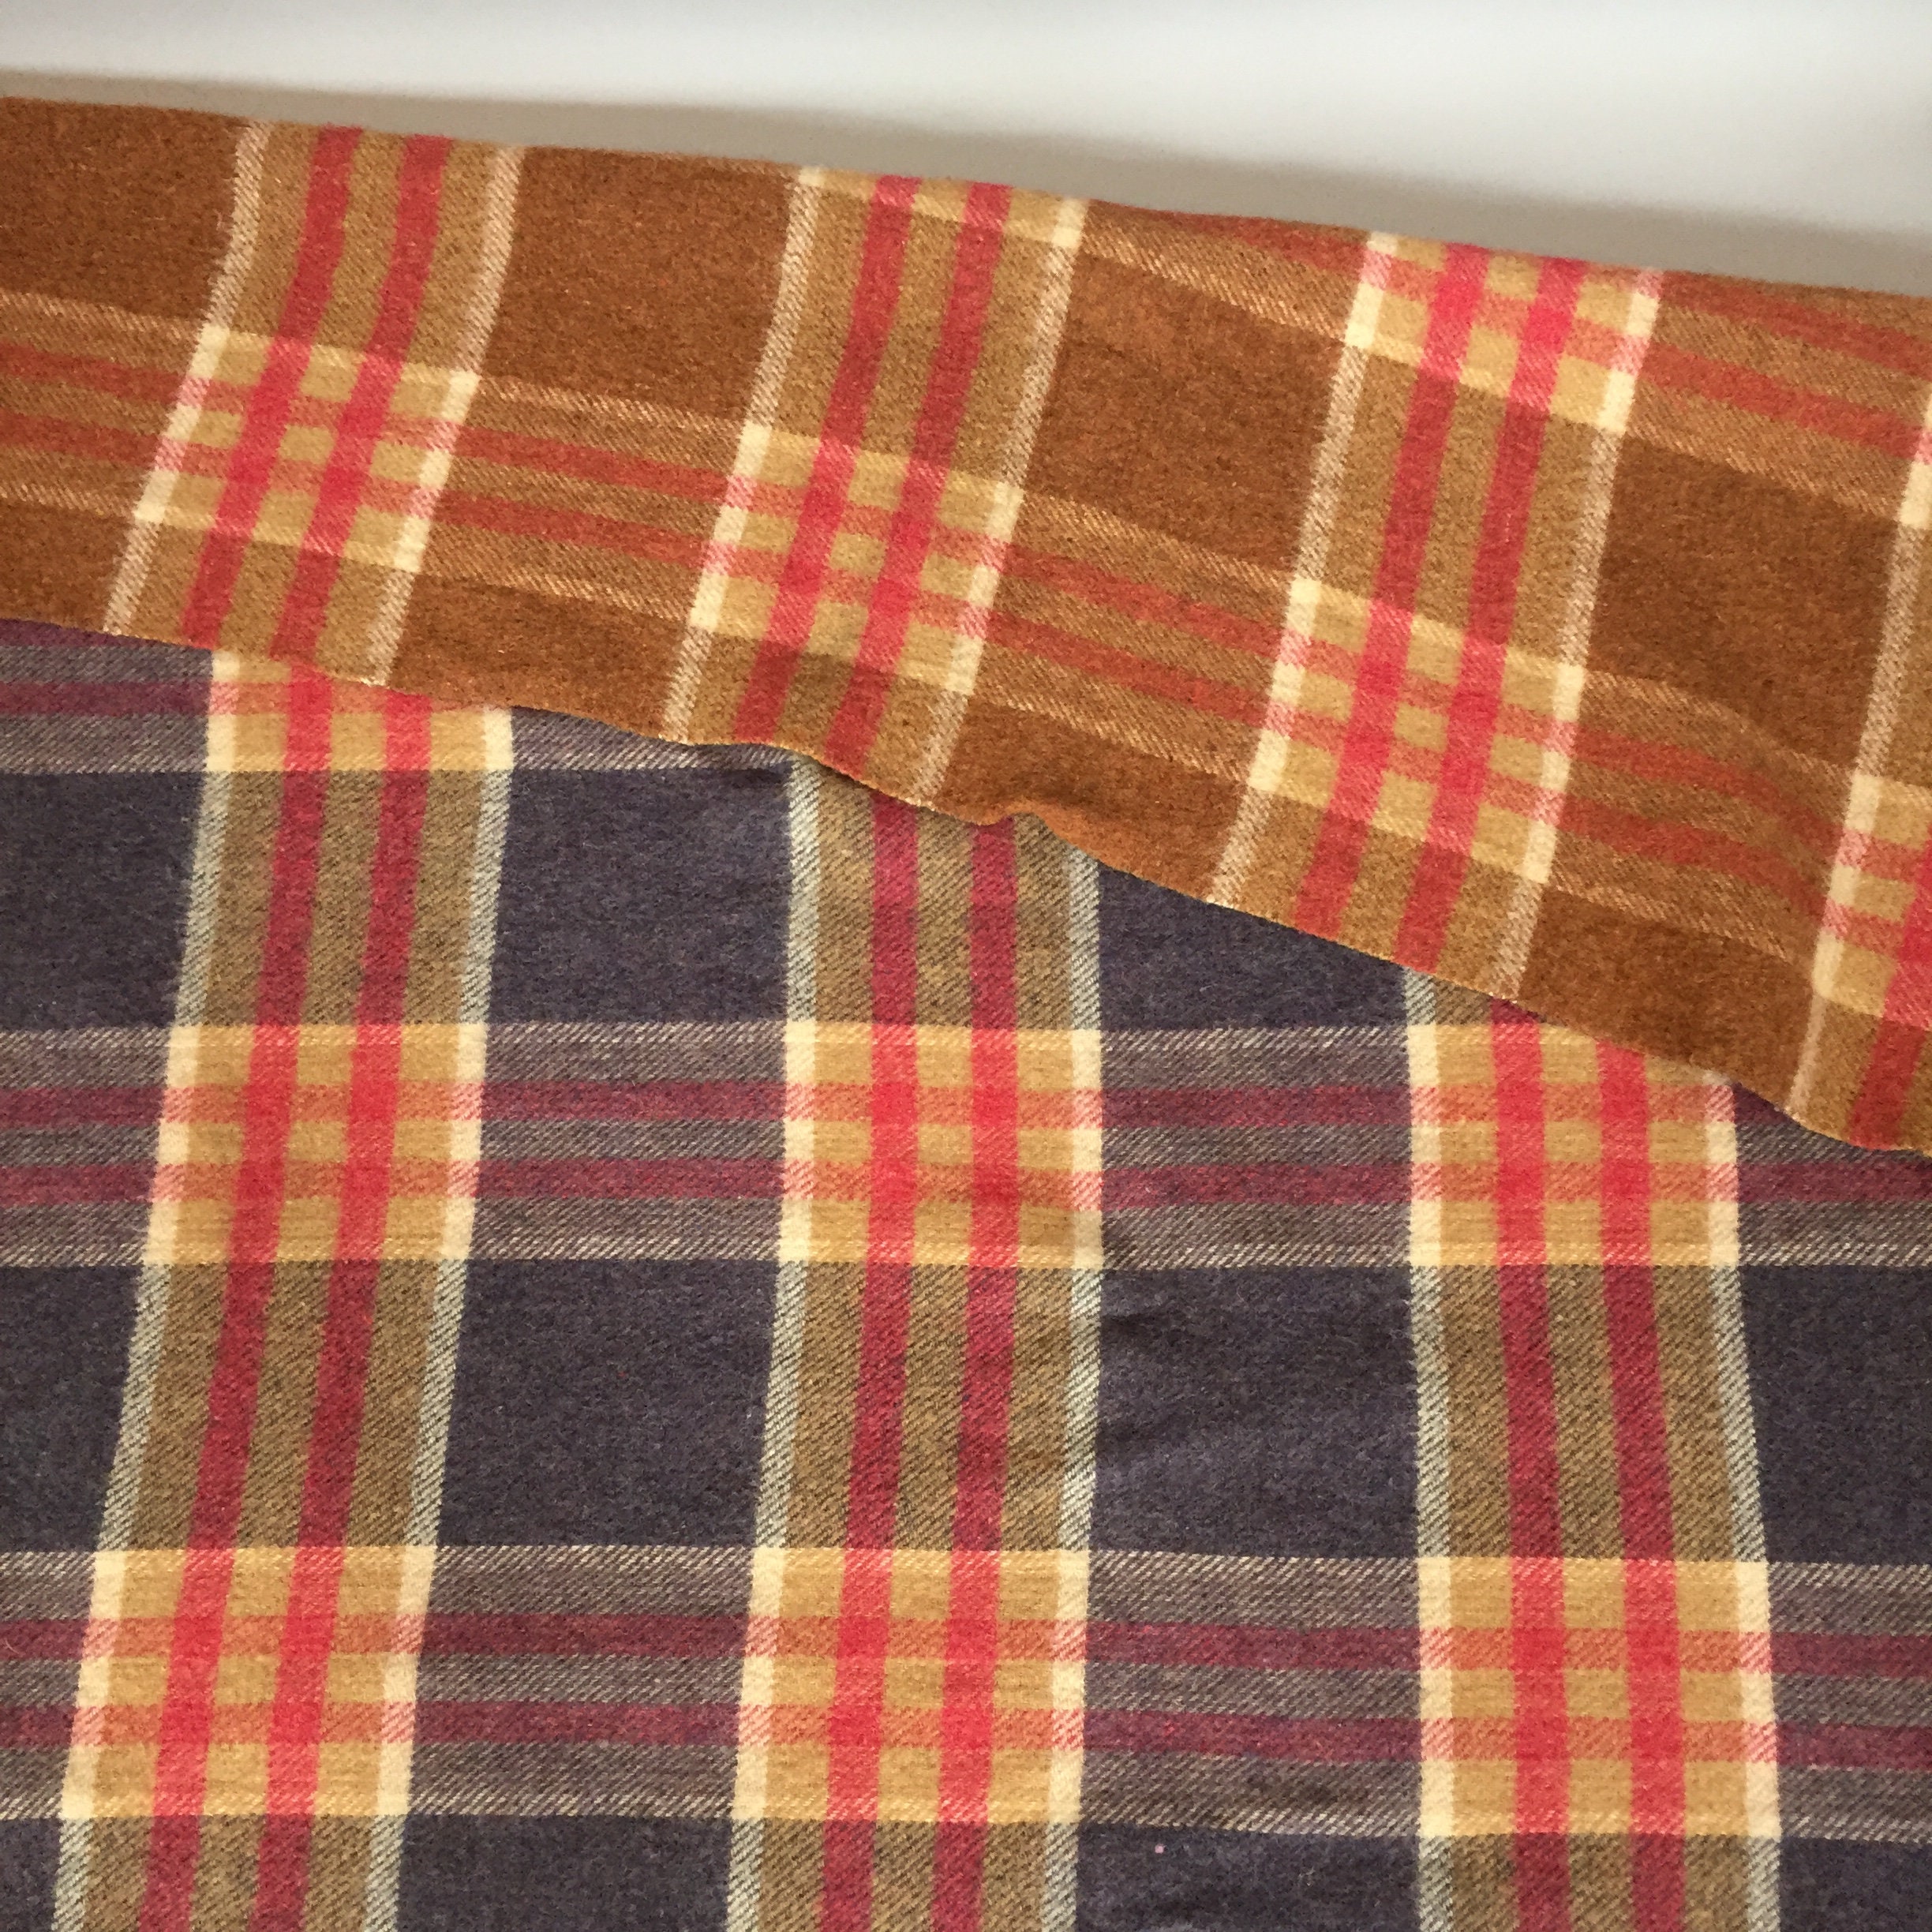 All wool British made rug / Blanket 1960s